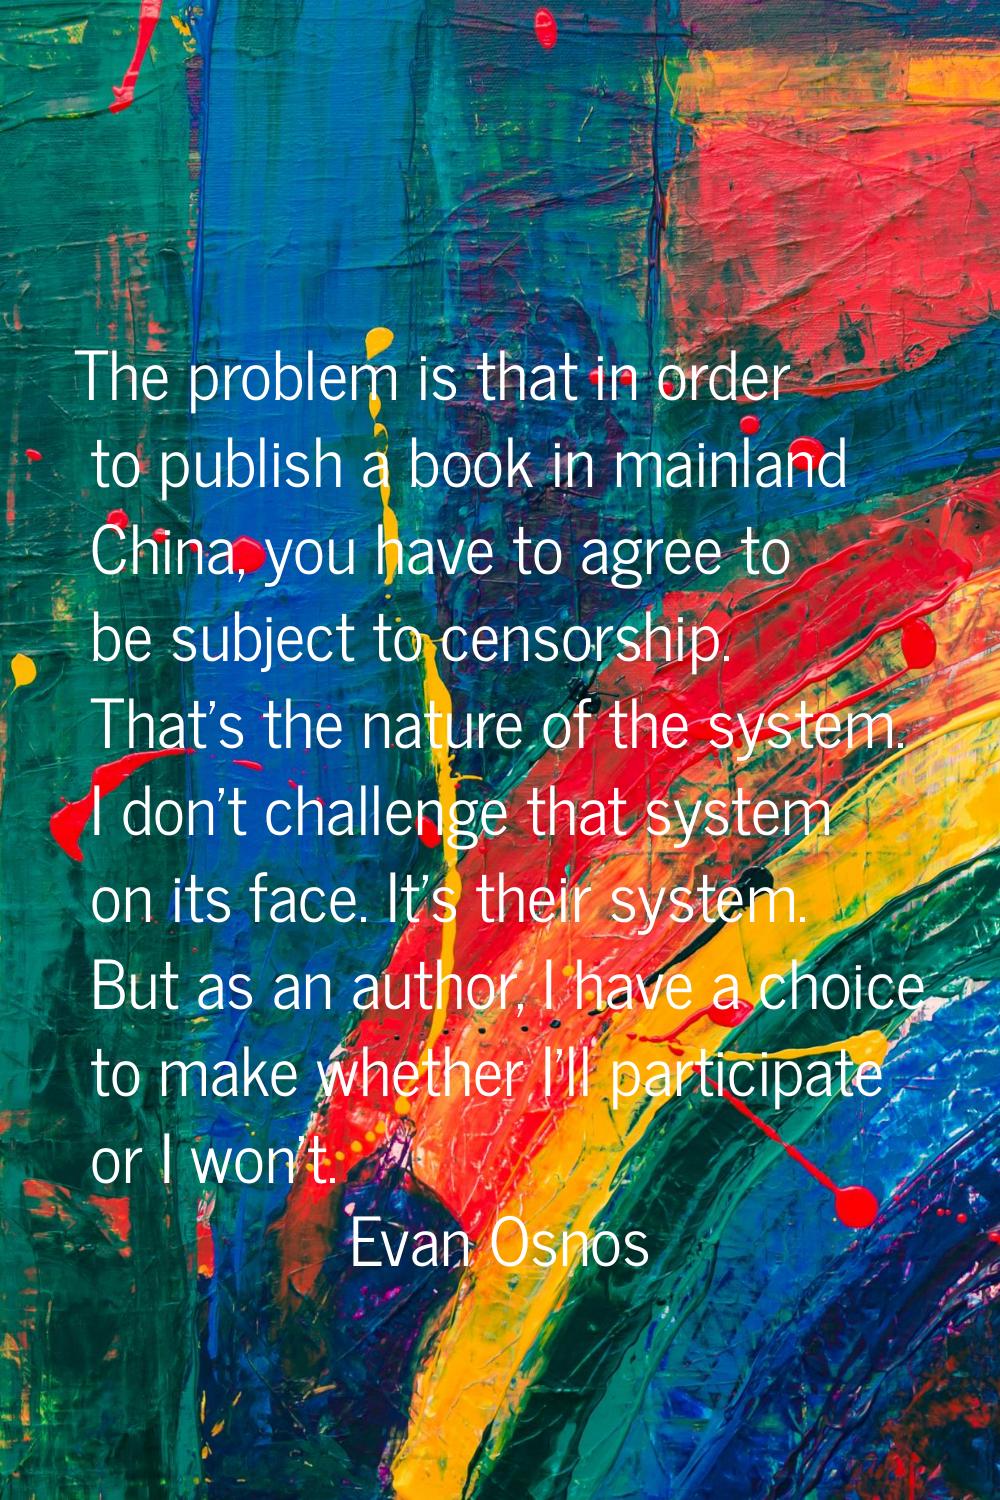 The problem is that in order to publish a book in mainland China, you have to agree to be subject t